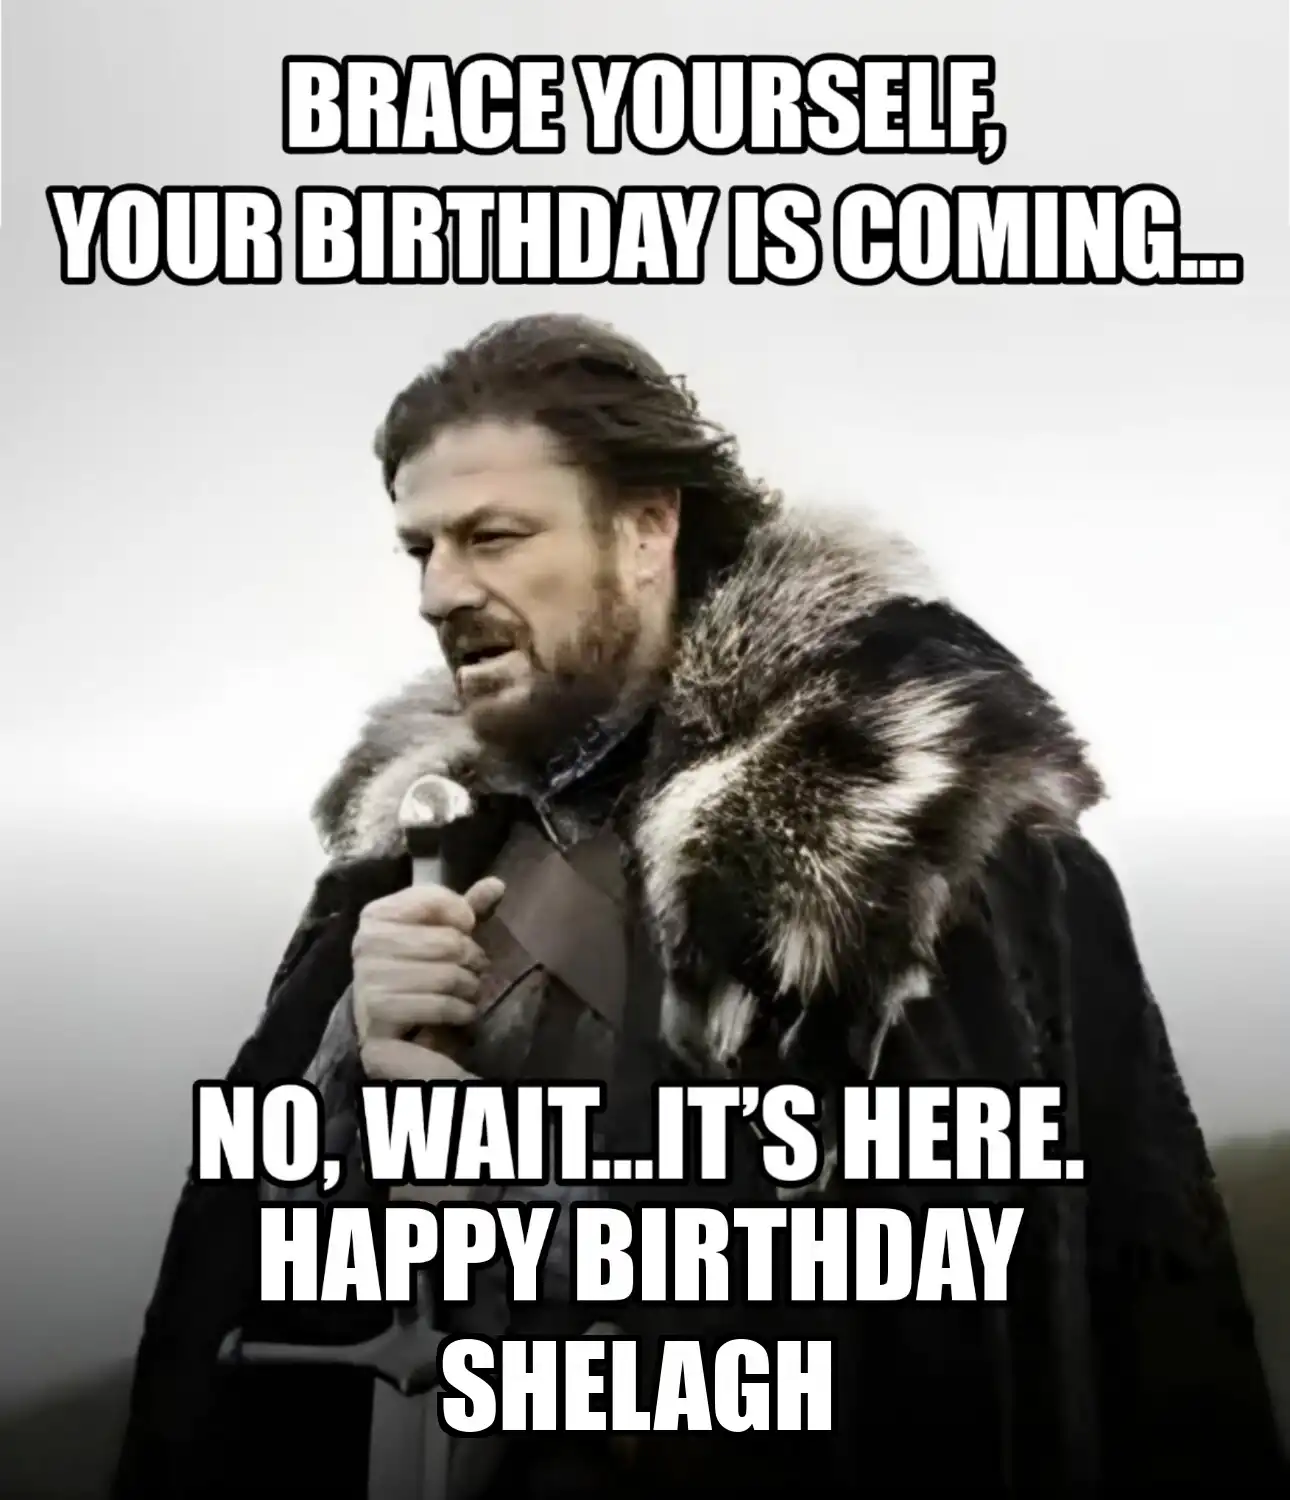 Happy Birthday Shelagh Brace Yourself Your Birthday Is Coming Meme